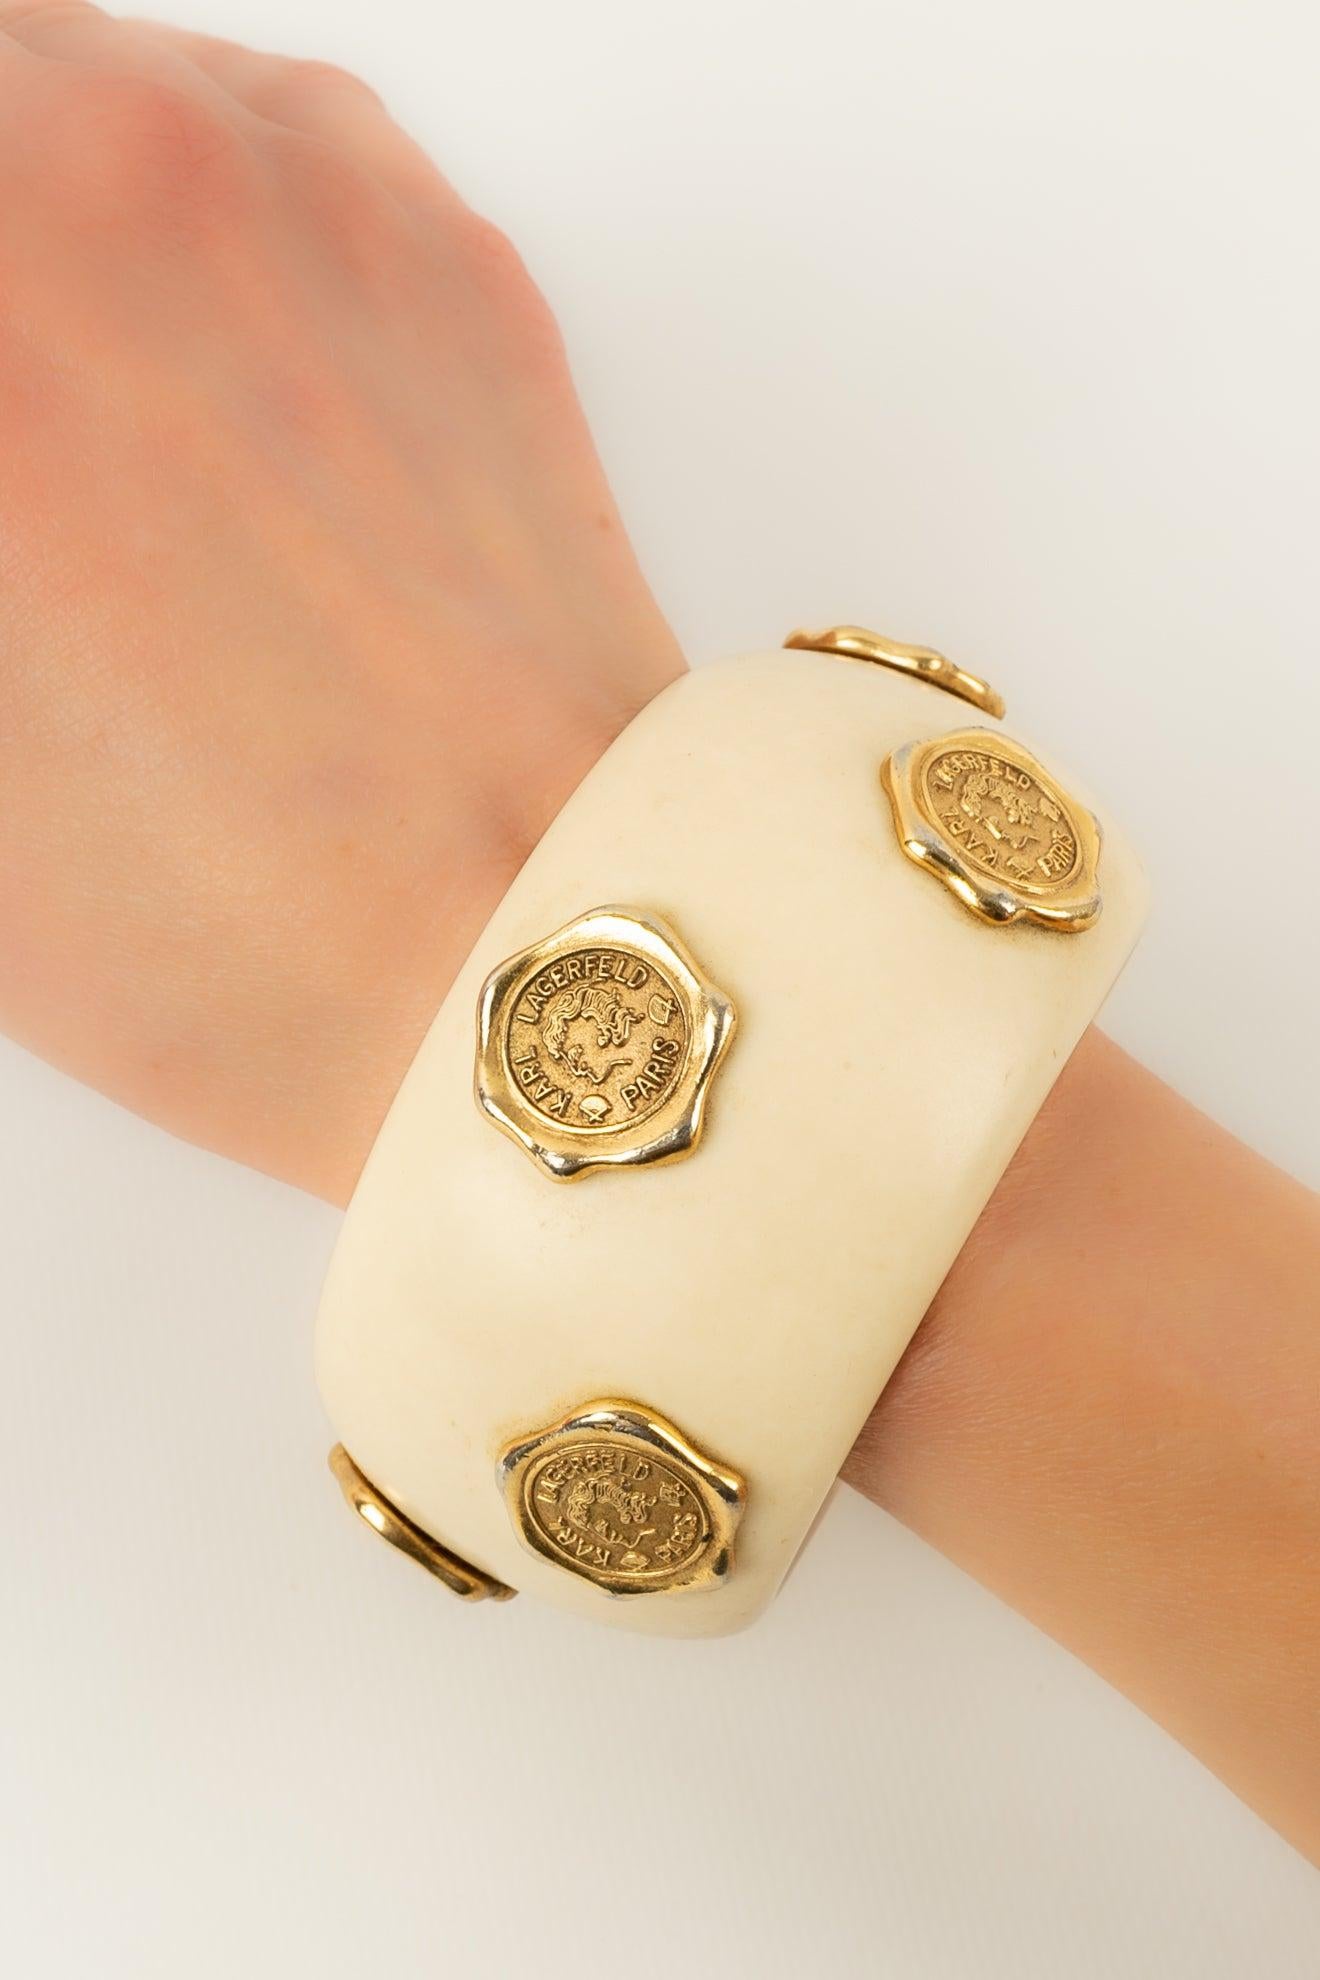 Lagerfeld - Cuff bracelet in beige bakelite ornamented with engraved pieces in gold-plated metal.

Additional information:
Condition: Good condition
Dimensions: Wrist circumference: 20 cm

Seller Reference: BRA176
